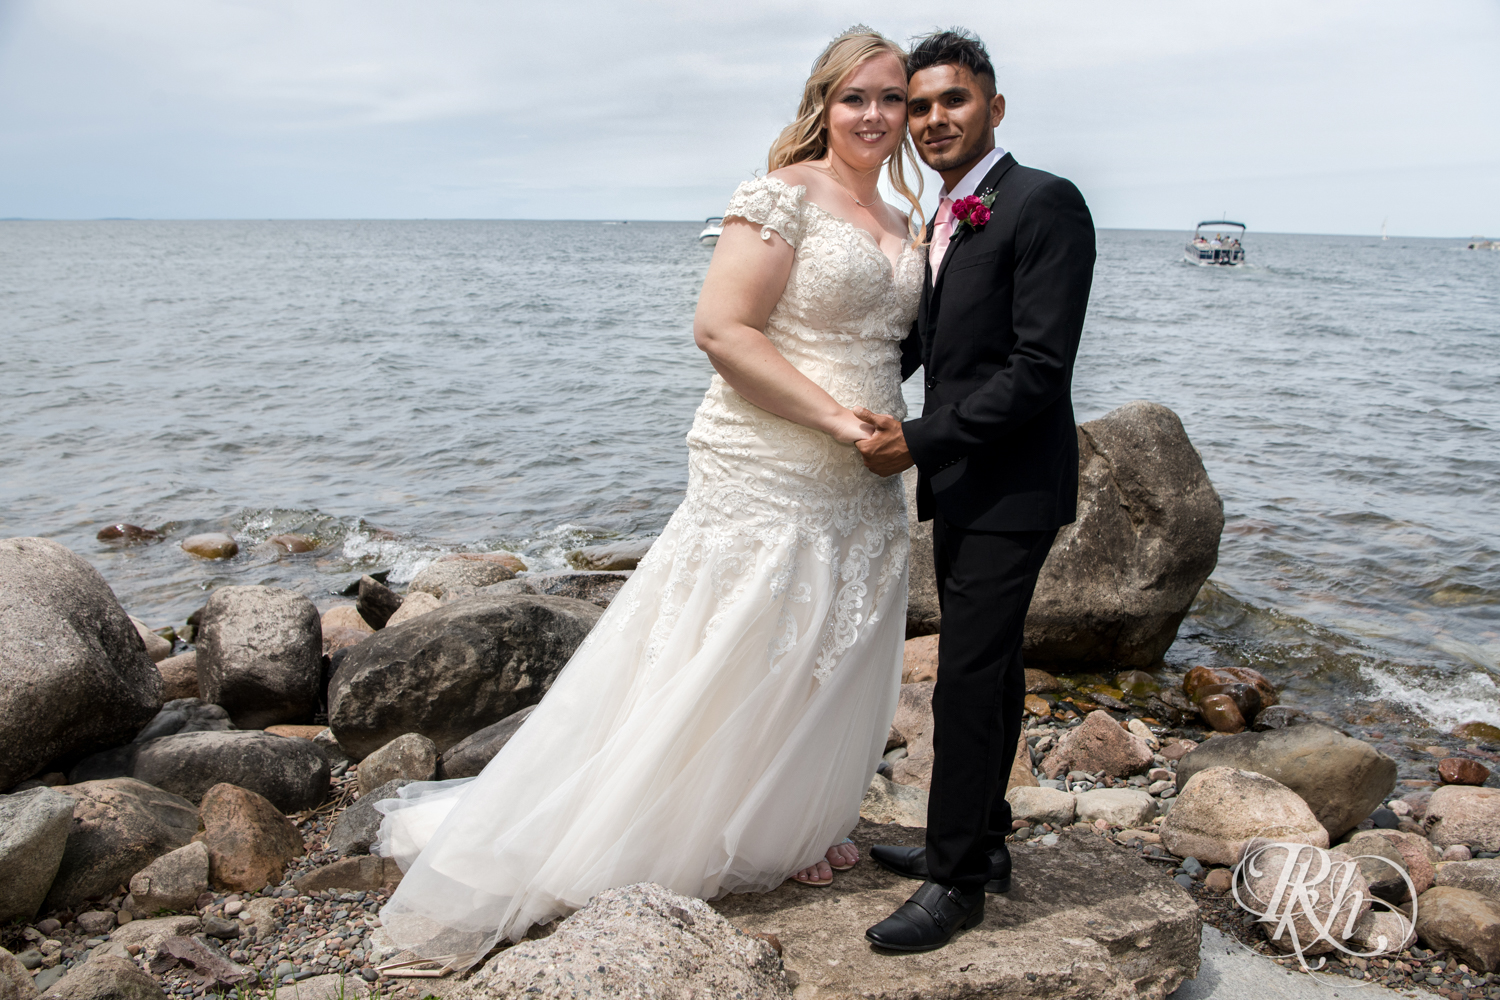 Bride and groom smile in front of Lake Mille Lacs at Izatys Resort in Onamia, Minnesota.